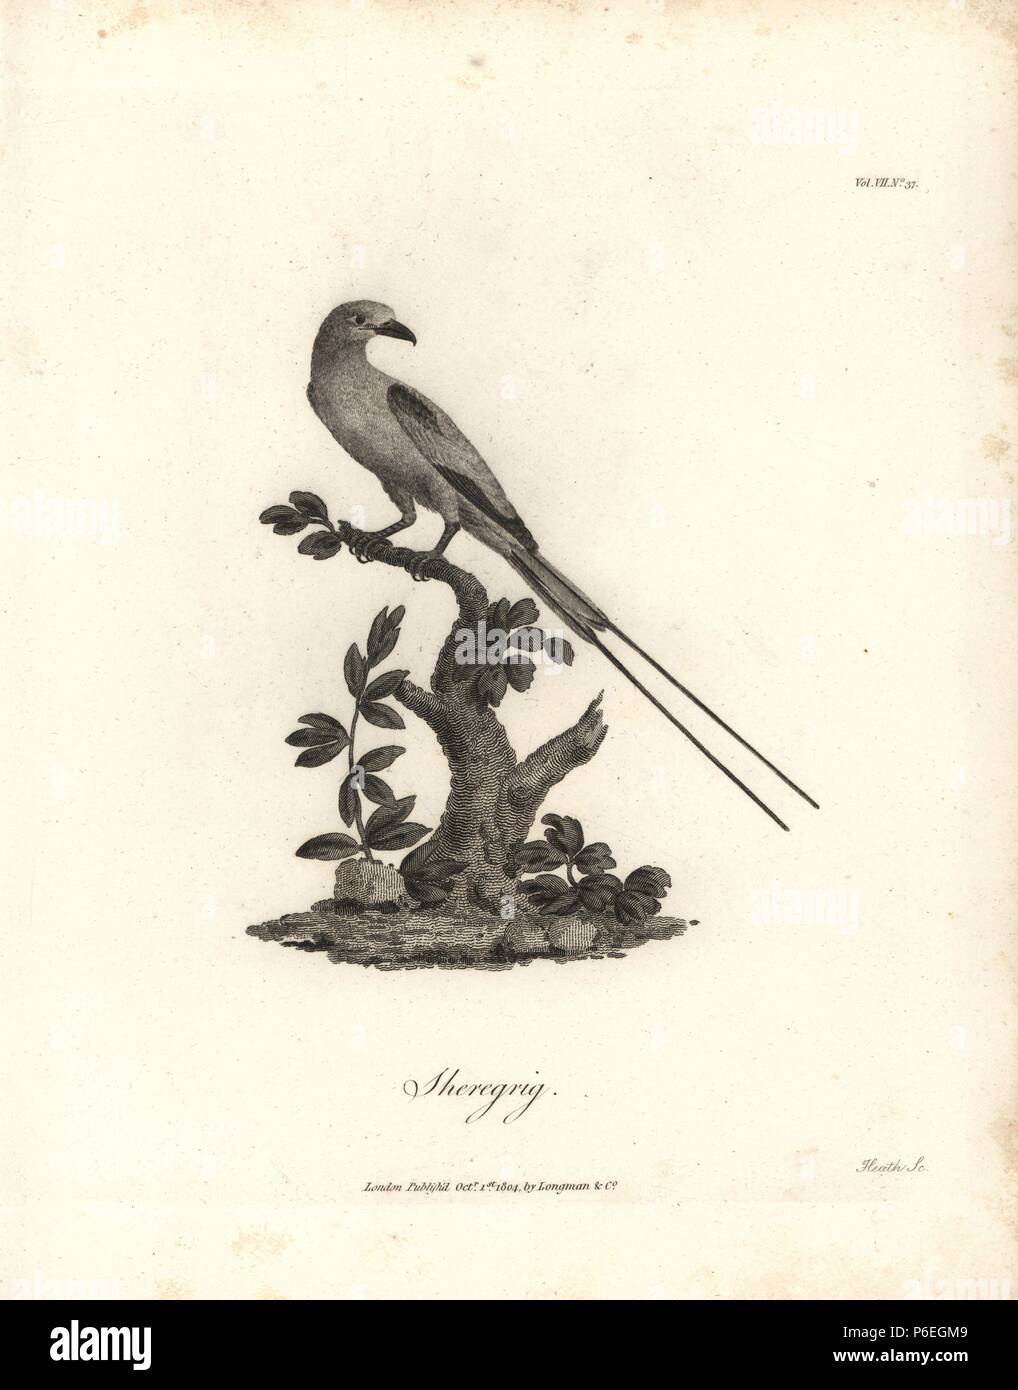 Sheregrig or lilac-breasted roller, Coracias caudatus. Copperplate engraving from James Bruce's 'Travels to Discover the Source of the Nile, in the years 1768, 1769, 1770, 1771, 1772 and 1773,' London, 1790. James Bruce (1730-1794) was a Scottish explorer and travel writer who spent more than 12 years in North Africa and Ethiopia. Engraved by Heath after an original drawing by Bruce. Stock Photo